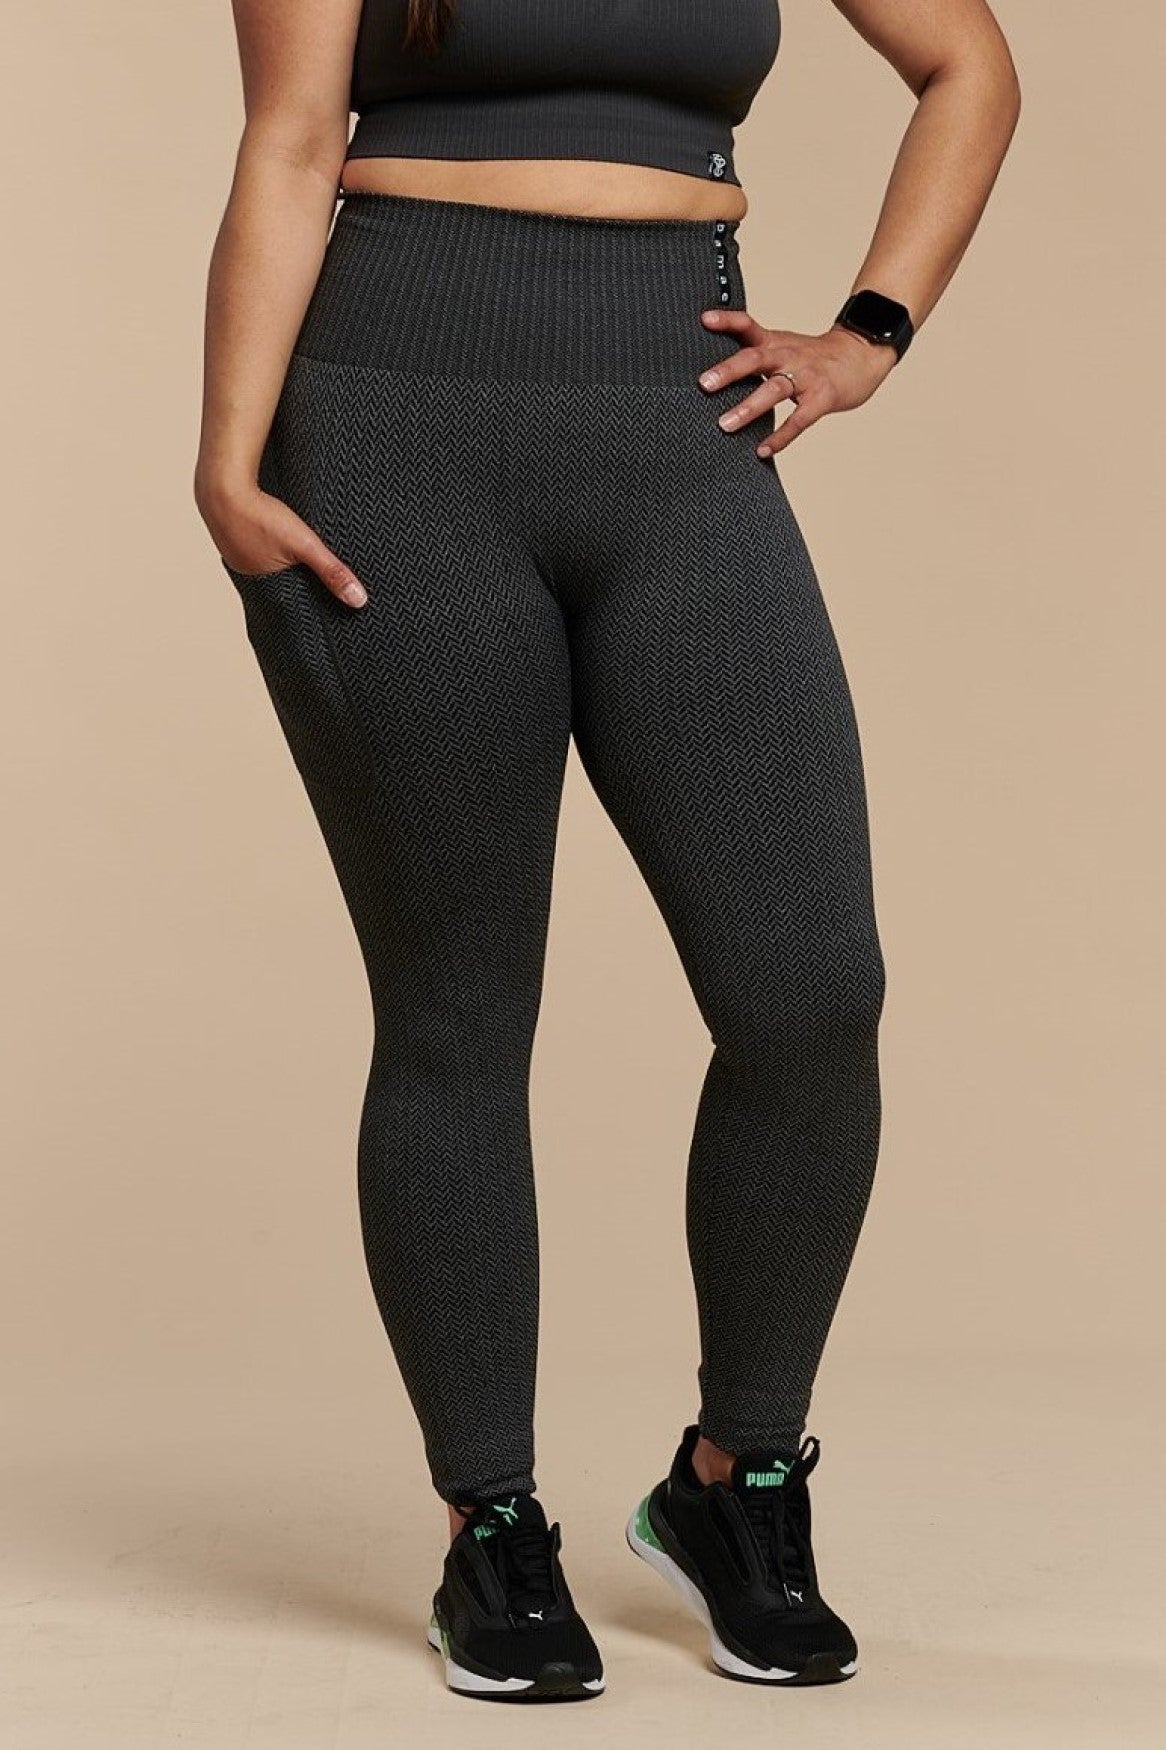 Buy Active Charcoal Seamless Leggings M, Trousers